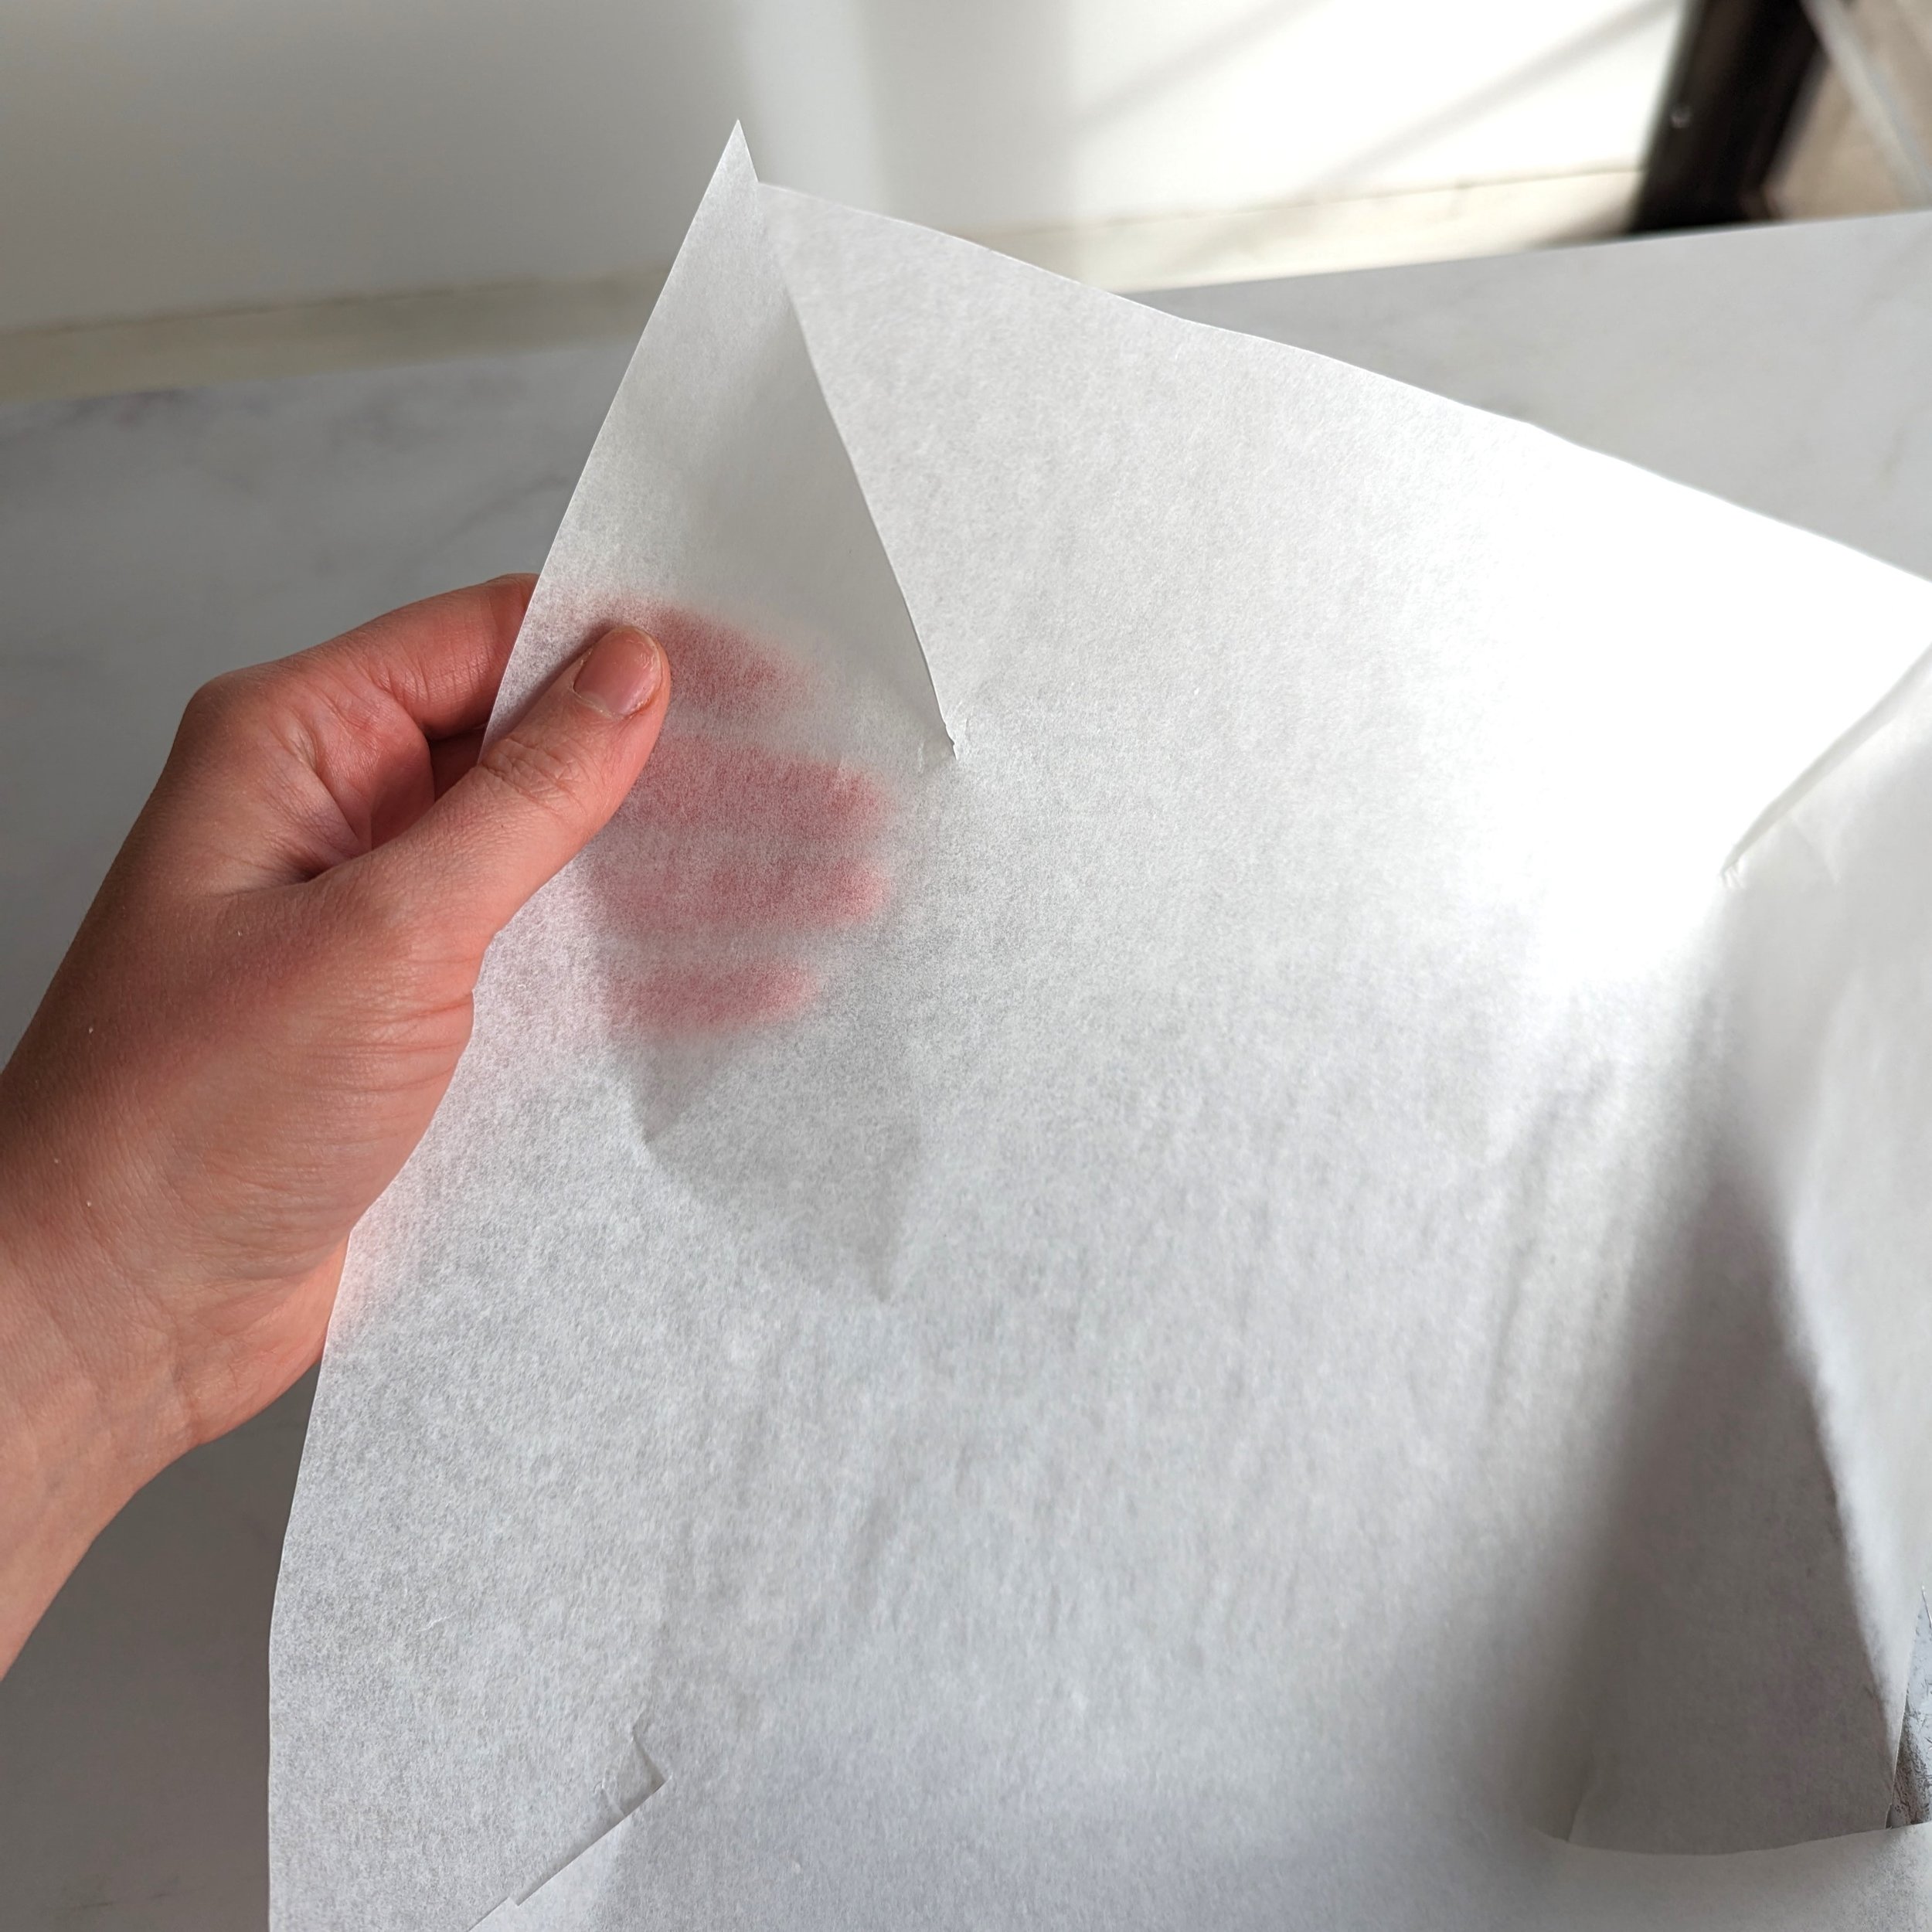 parchment for brownie pan.jpg